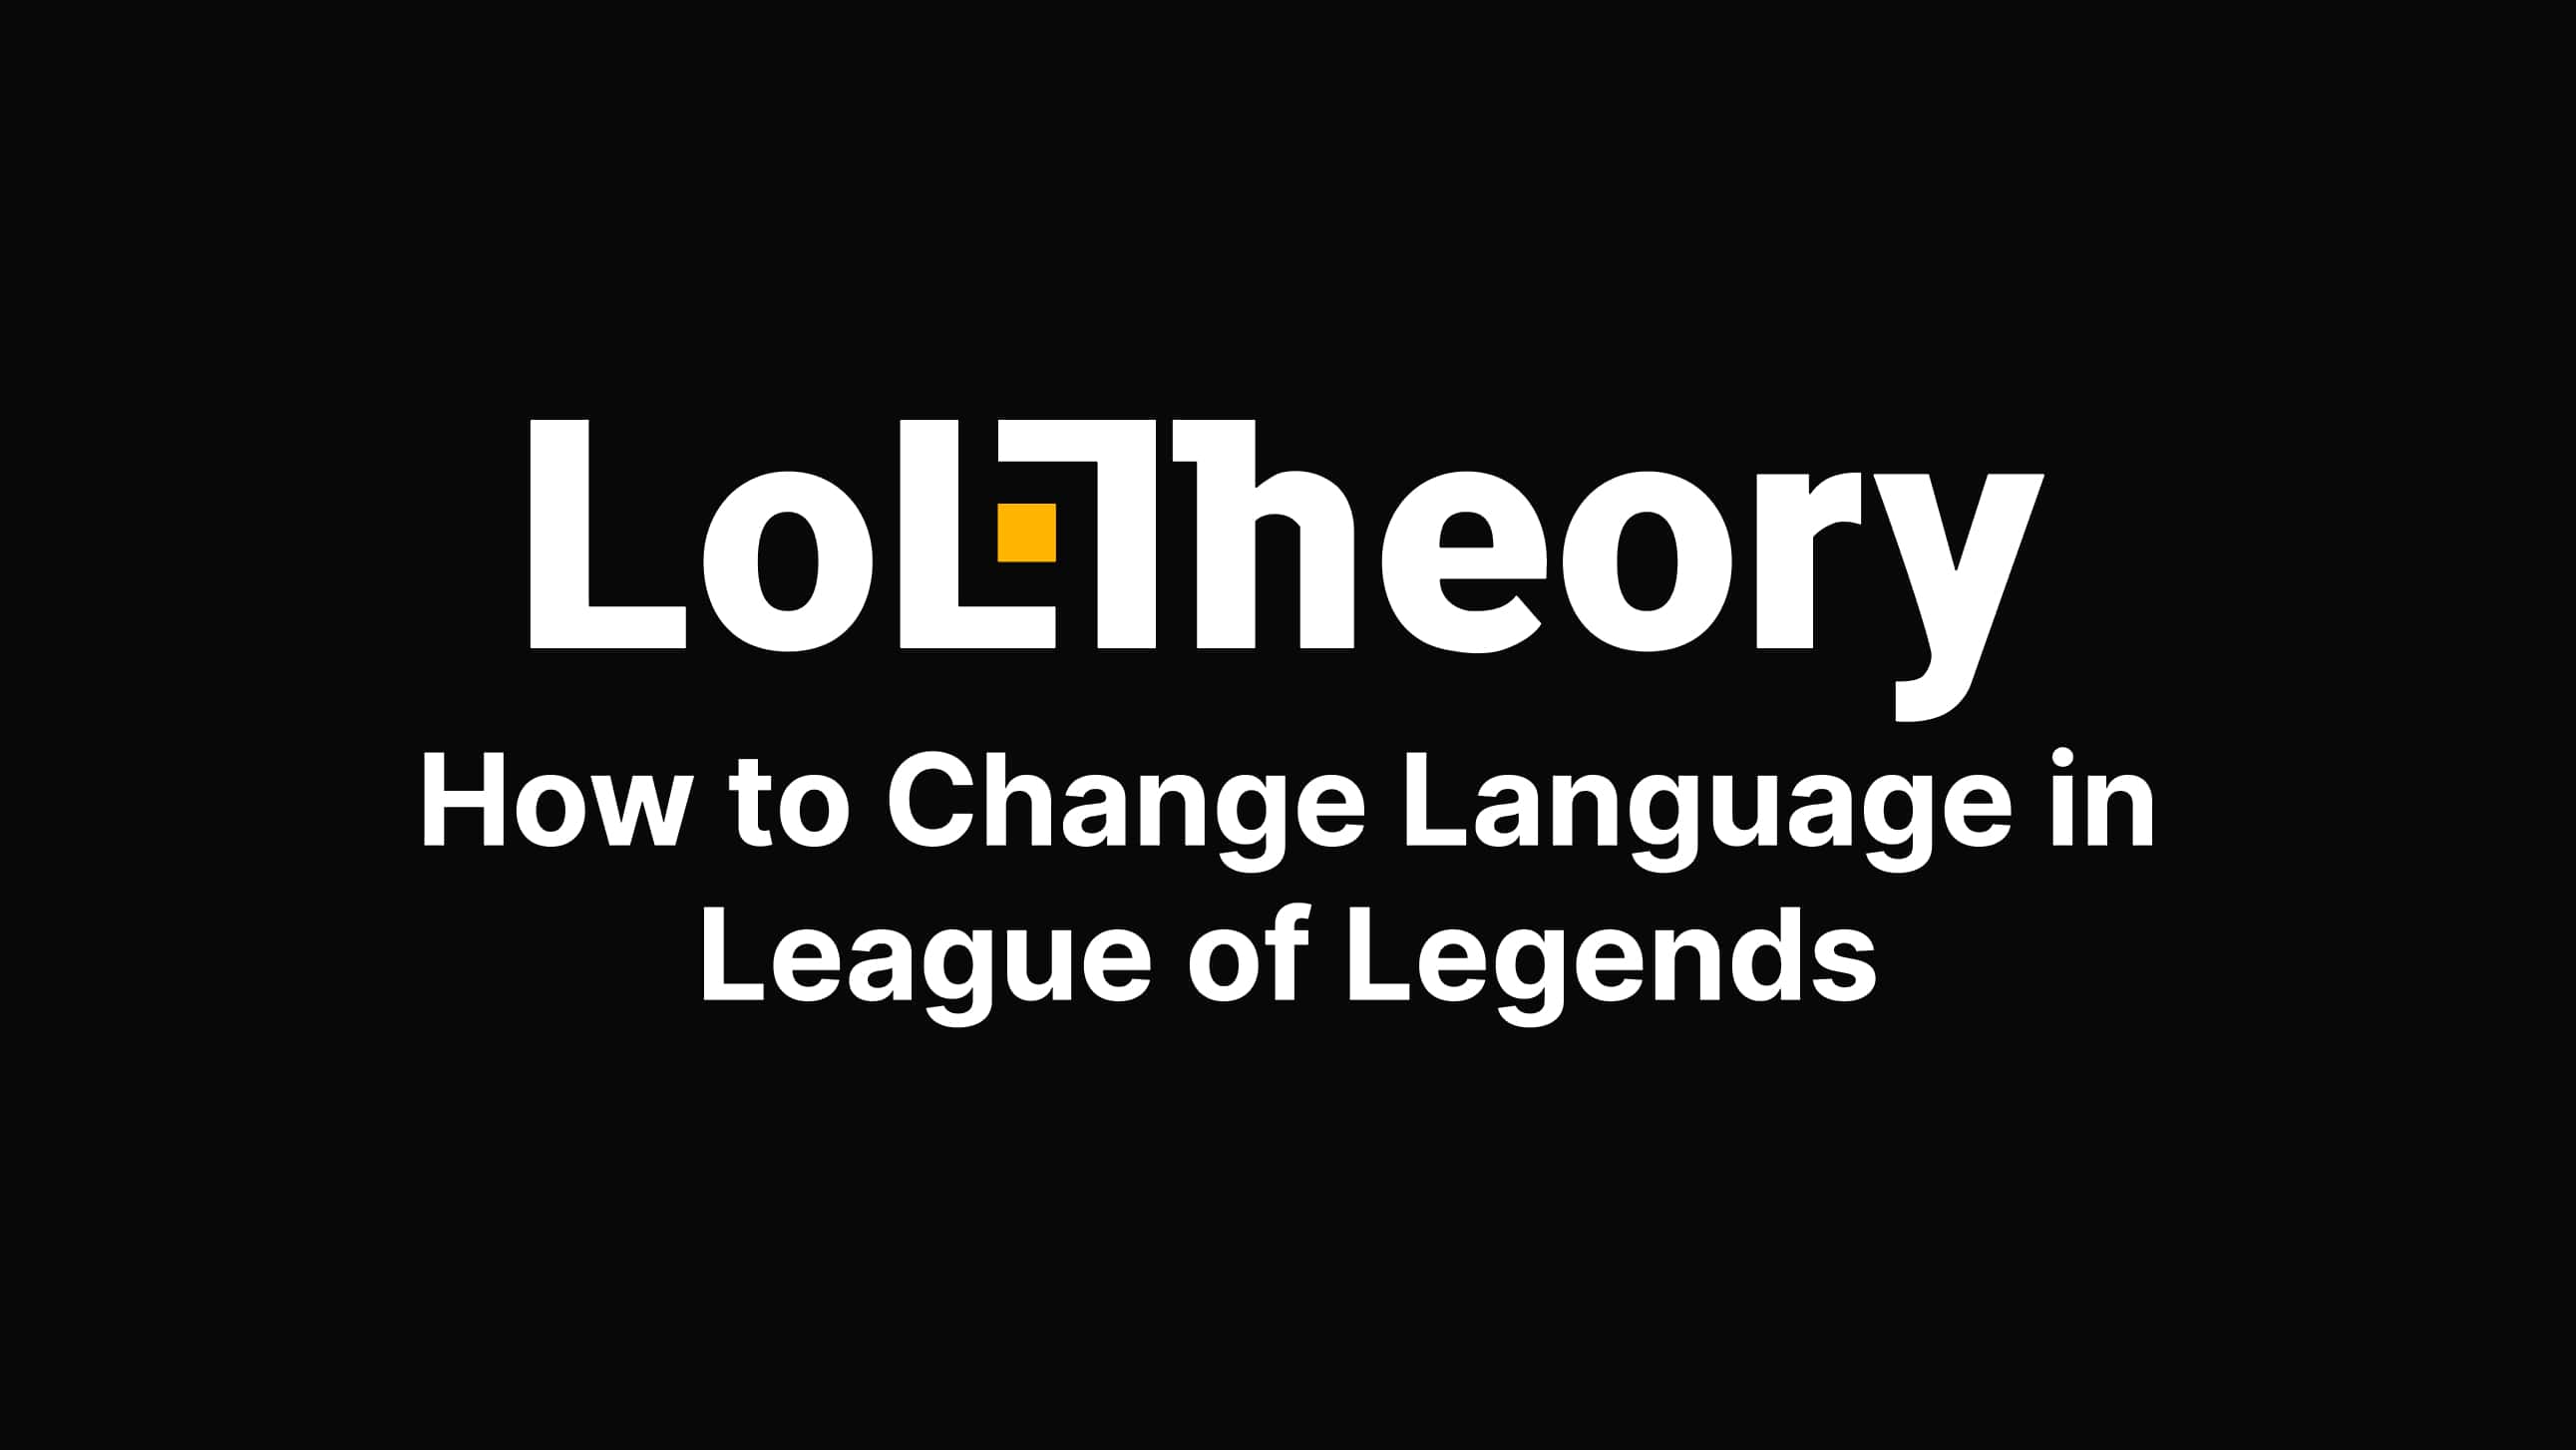 How to Change League of Legends Language?